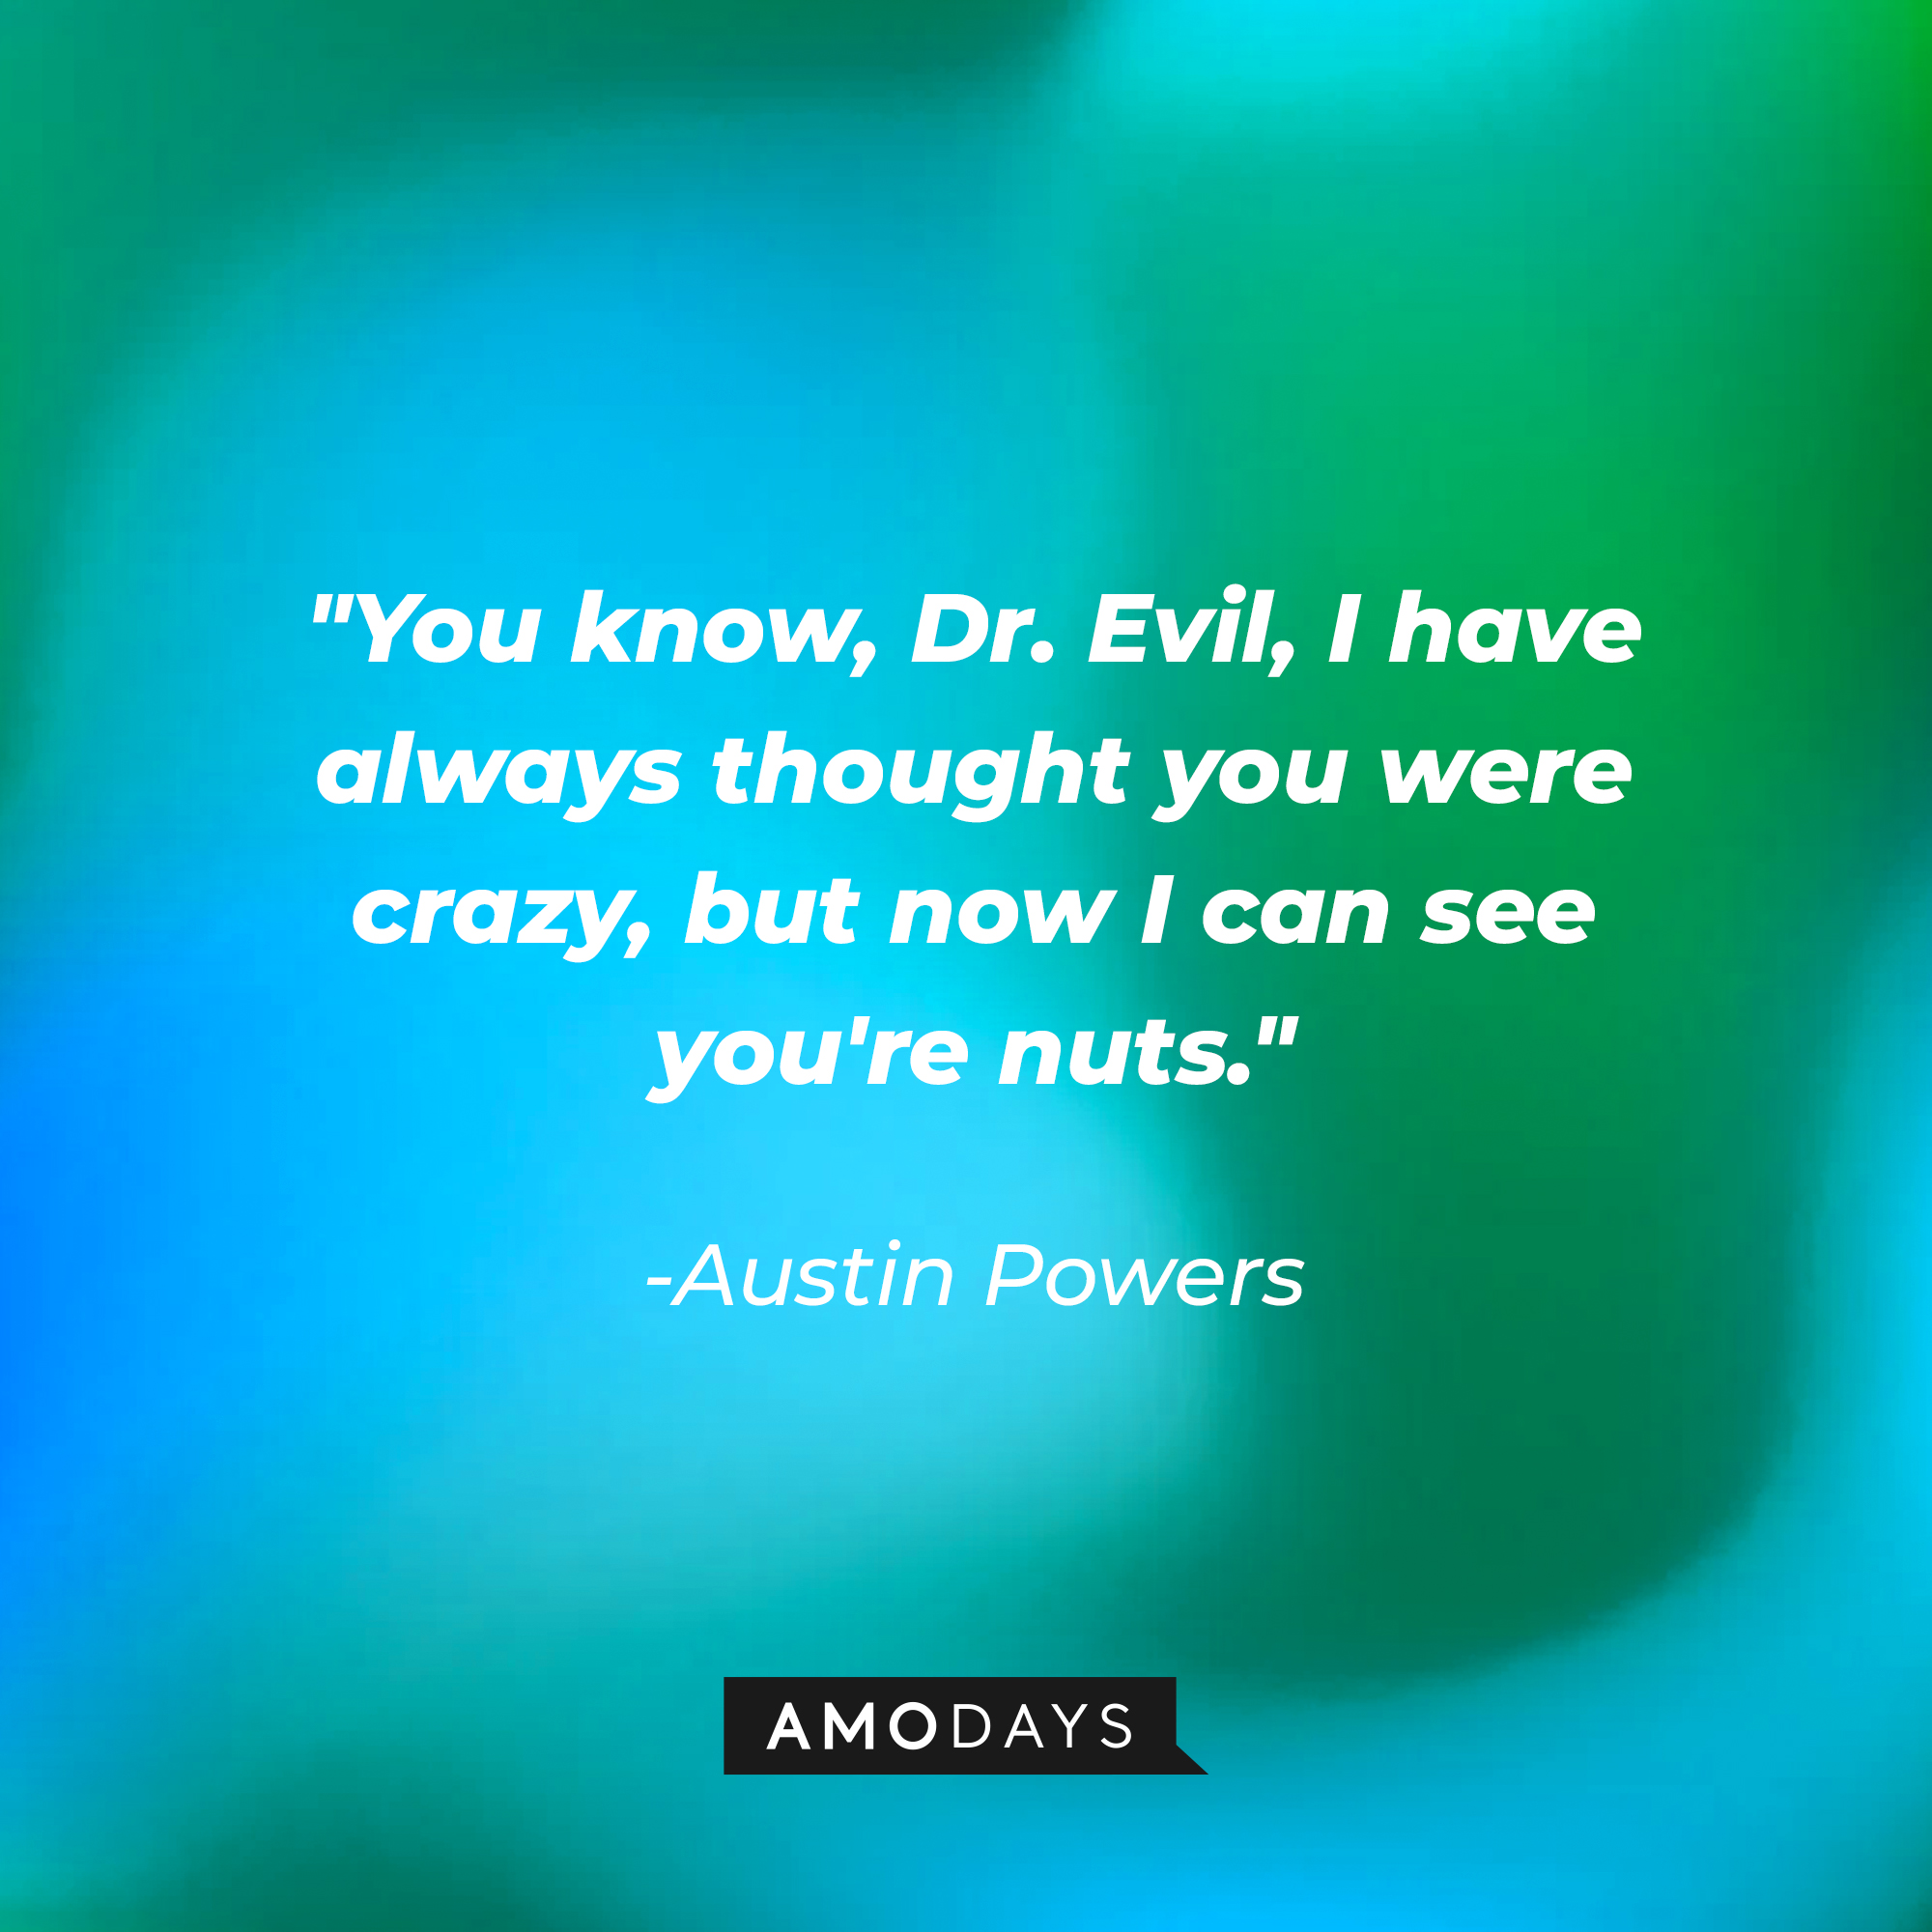 Austin Powers' quote: "You know, Dr. Evil, I have always thought you were crazy, but now I can see you're nuts." | Source: Amodays